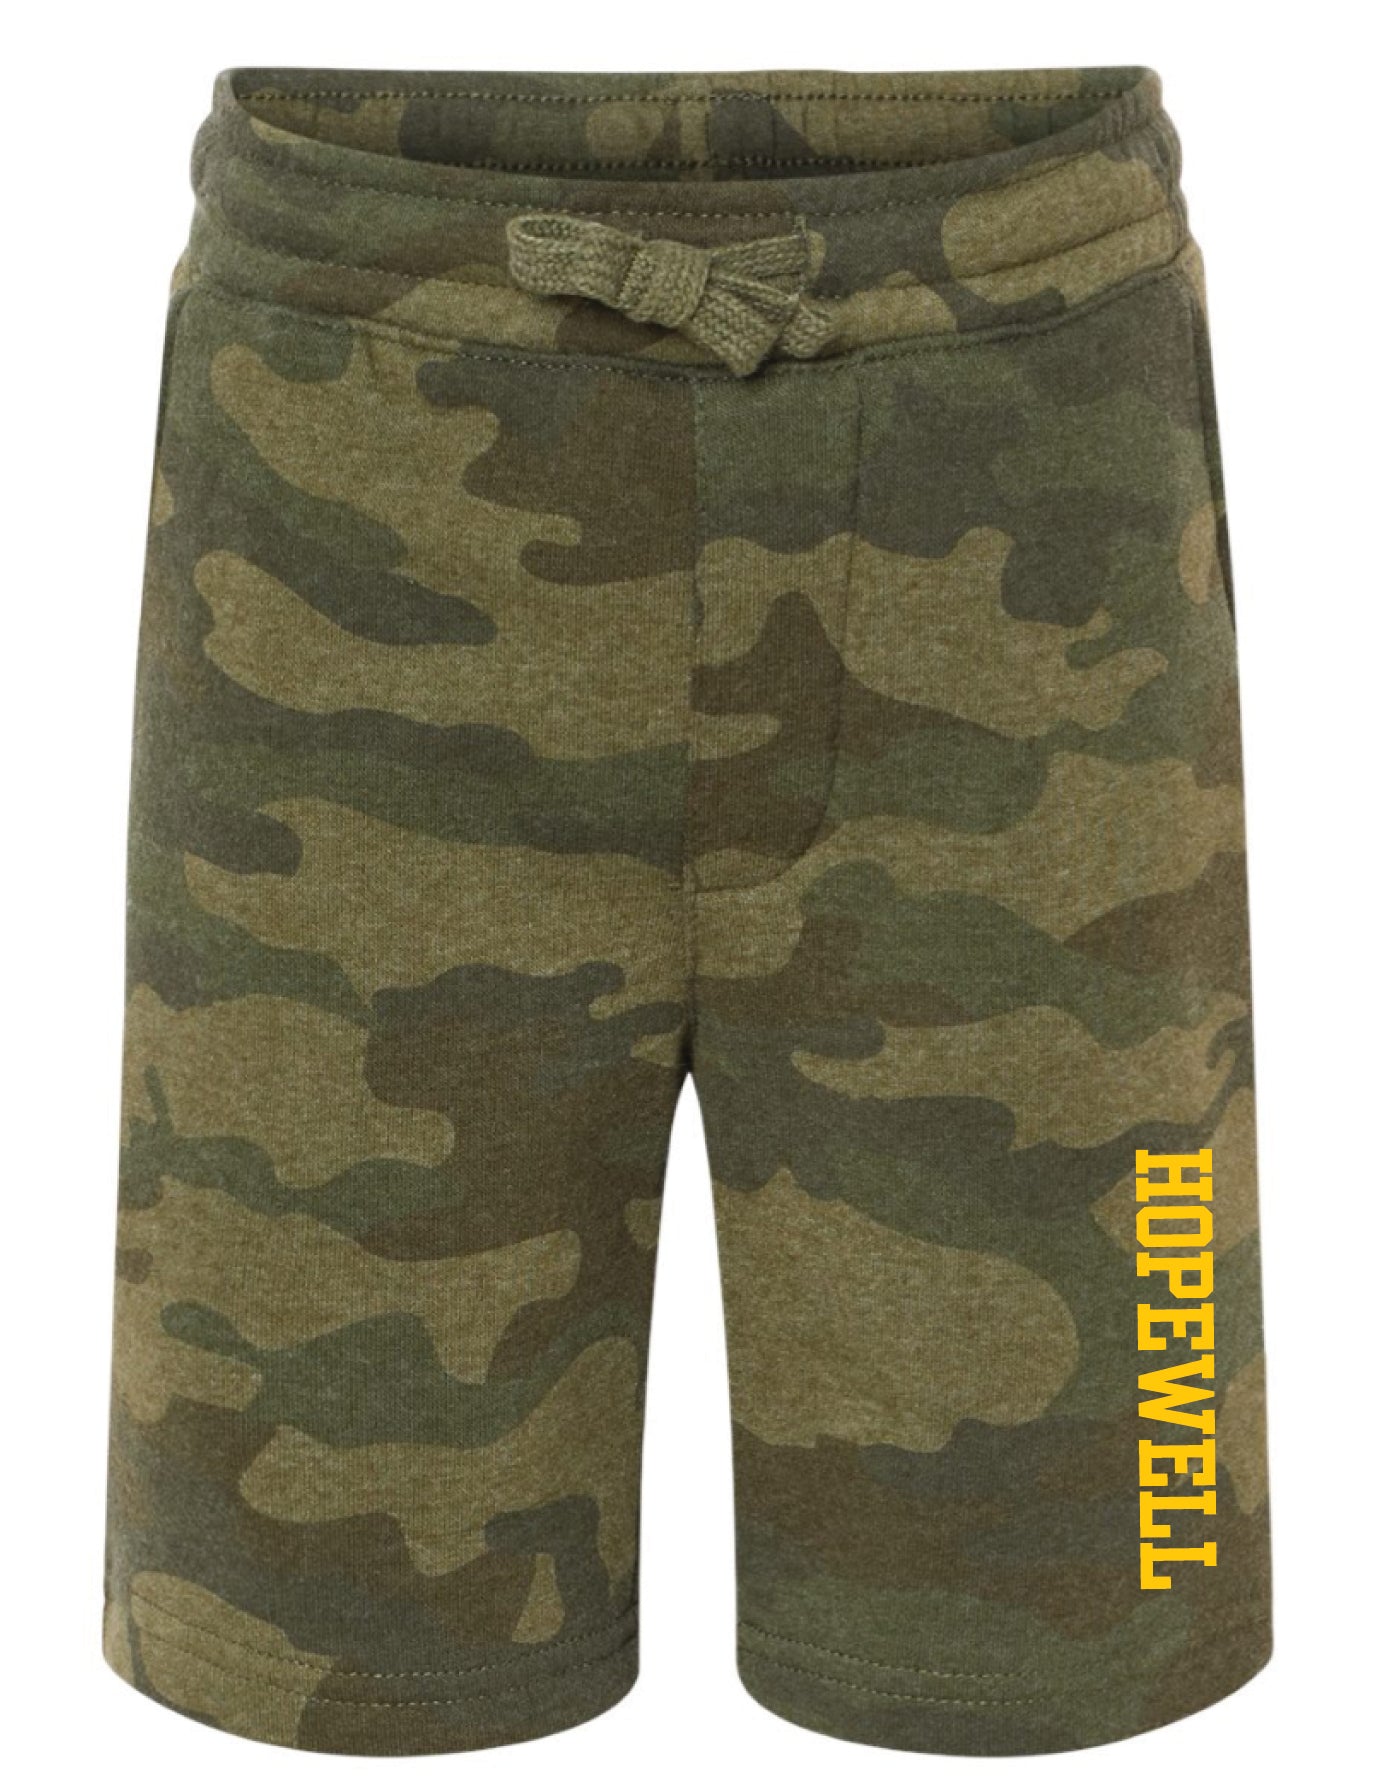 Hopewell Camo Cotton Blend Shorts- Youth and Adult Unisex